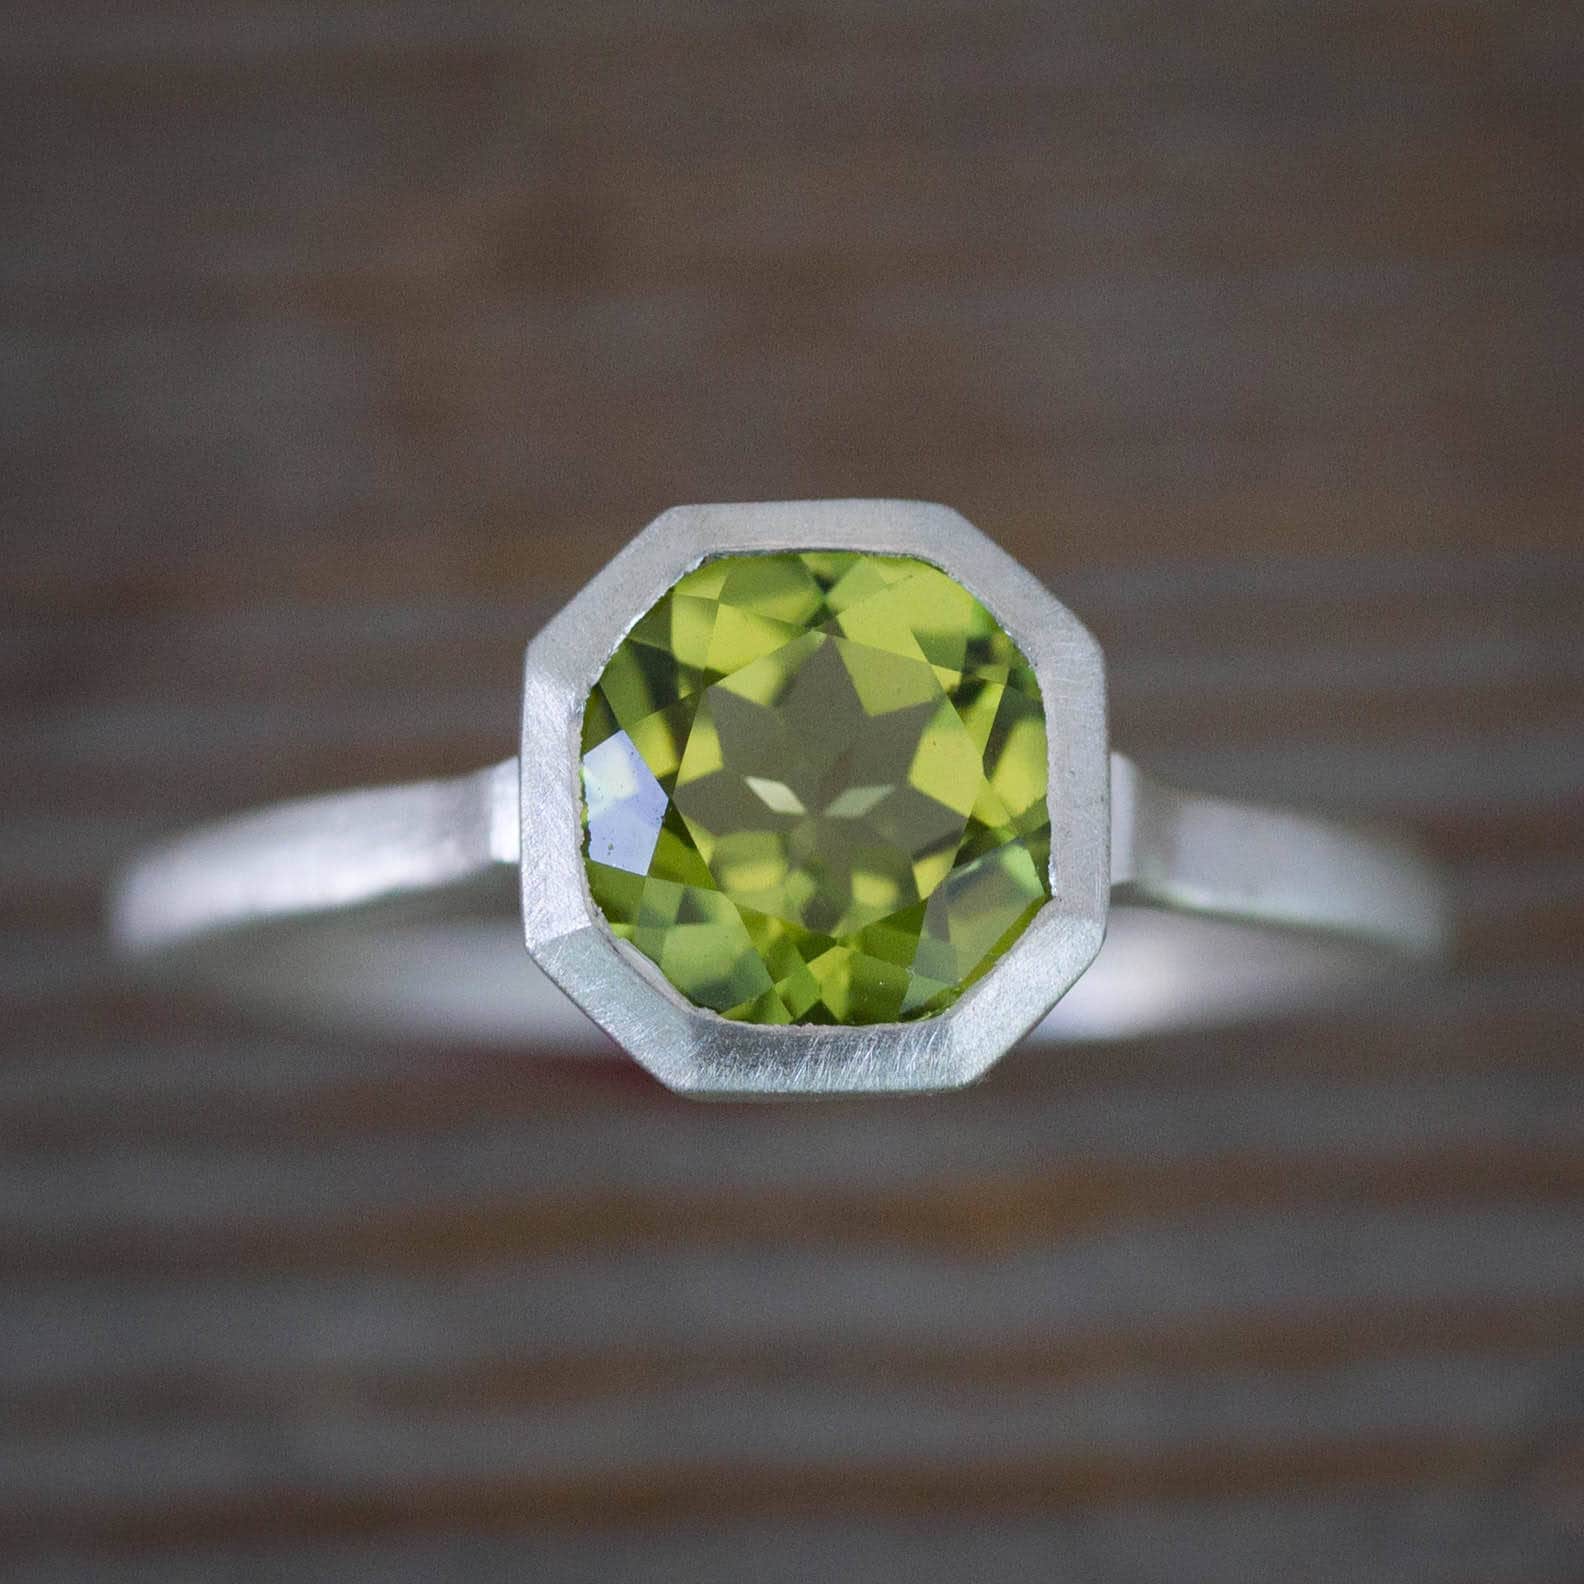 A handmade Peridot Ring in August Birthstone in sterling silver by Cassin Jewelry.